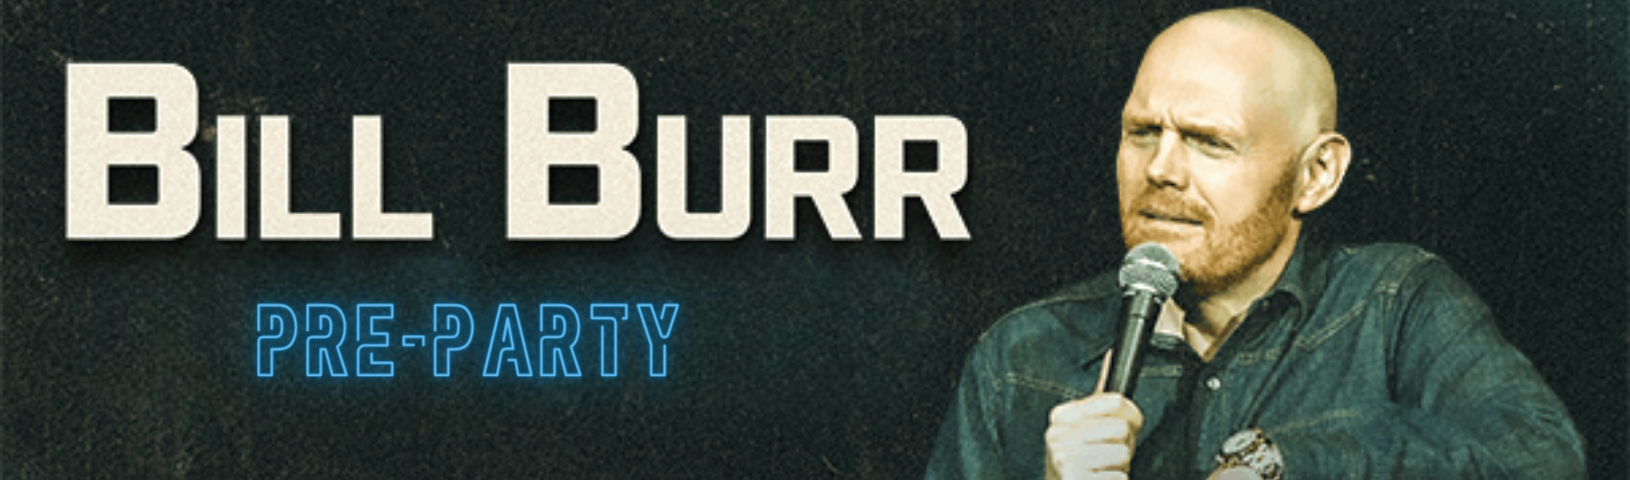 Bill Burr Pre-Party Background Image